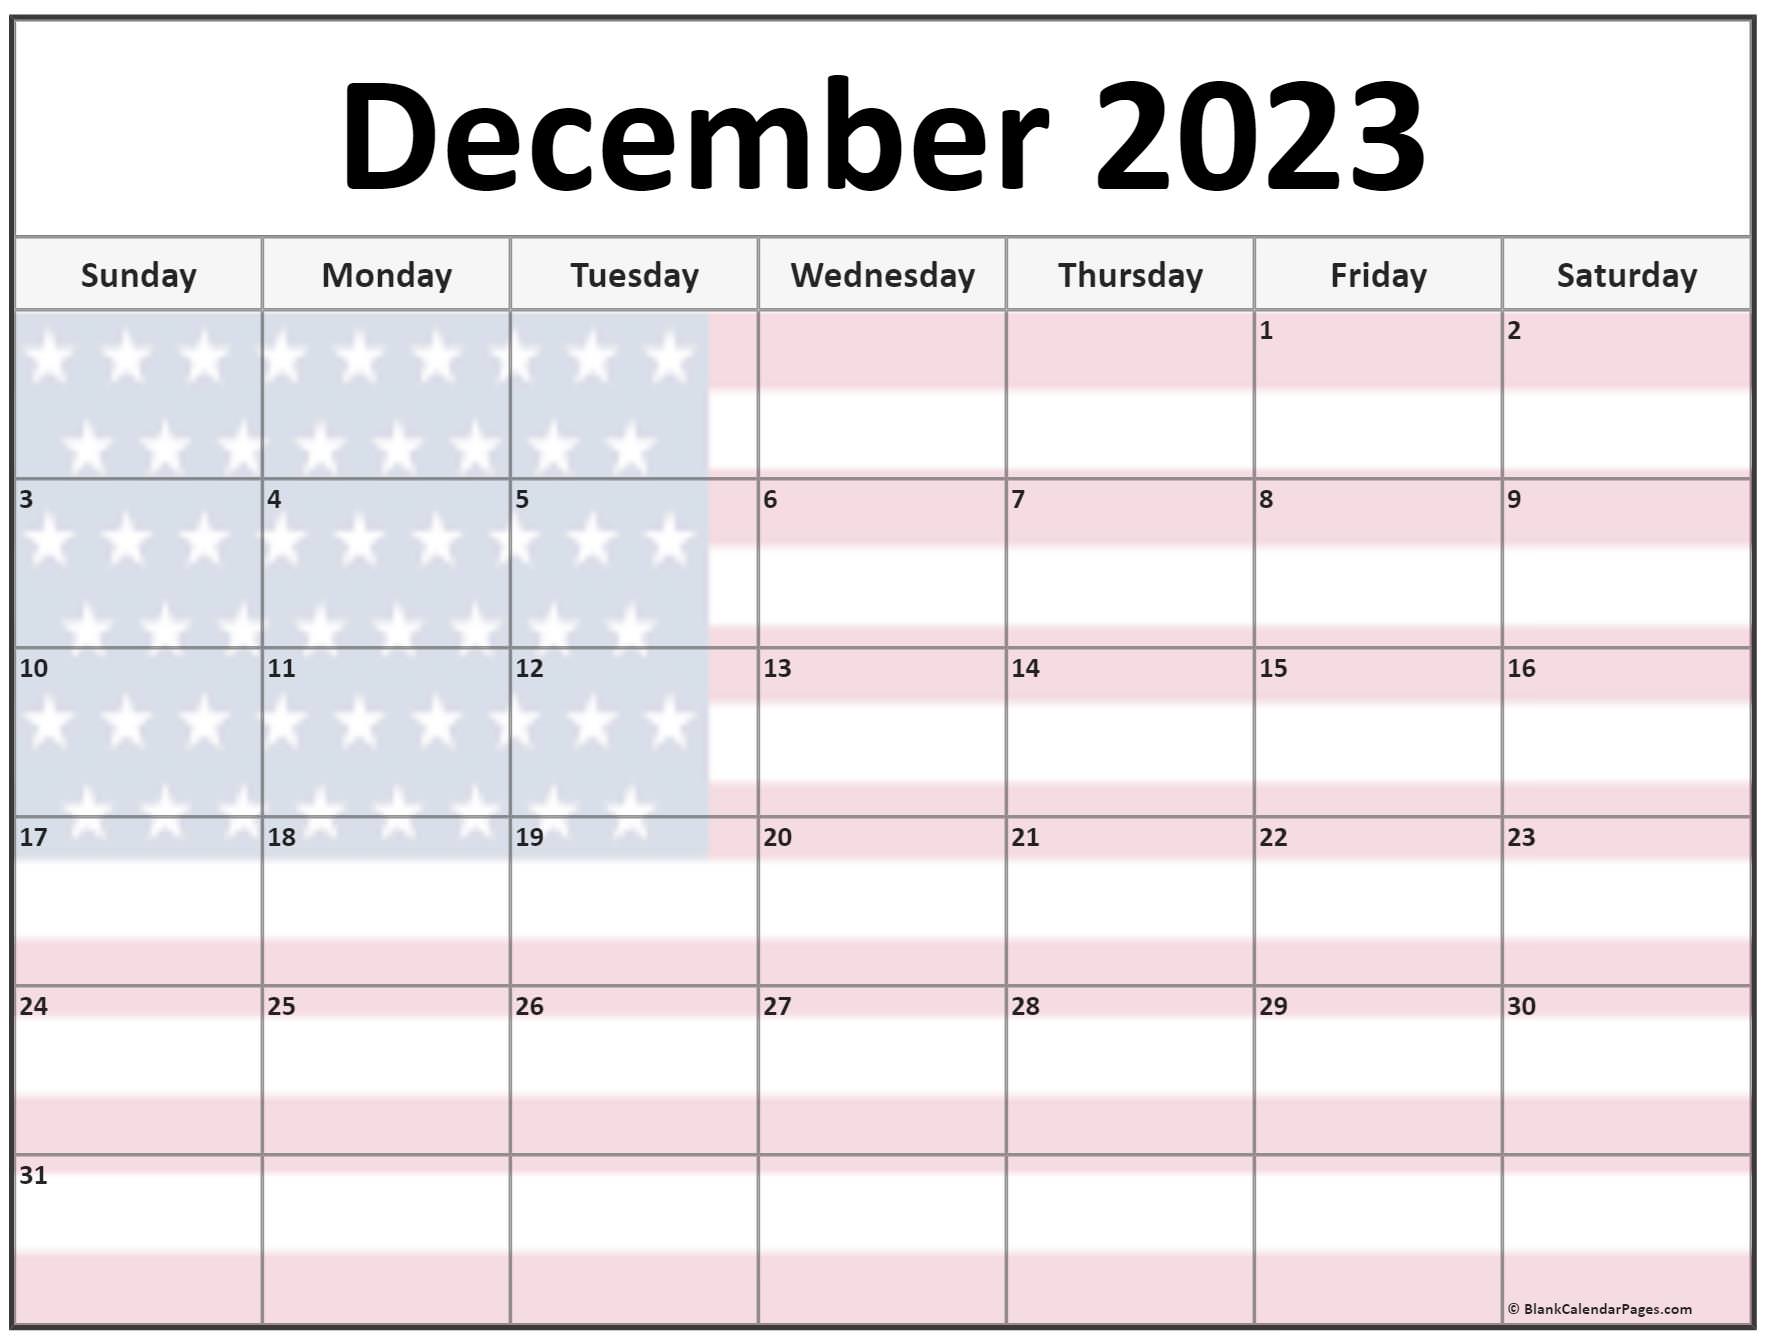 Collection of December 2023 photo calendars with image filters.